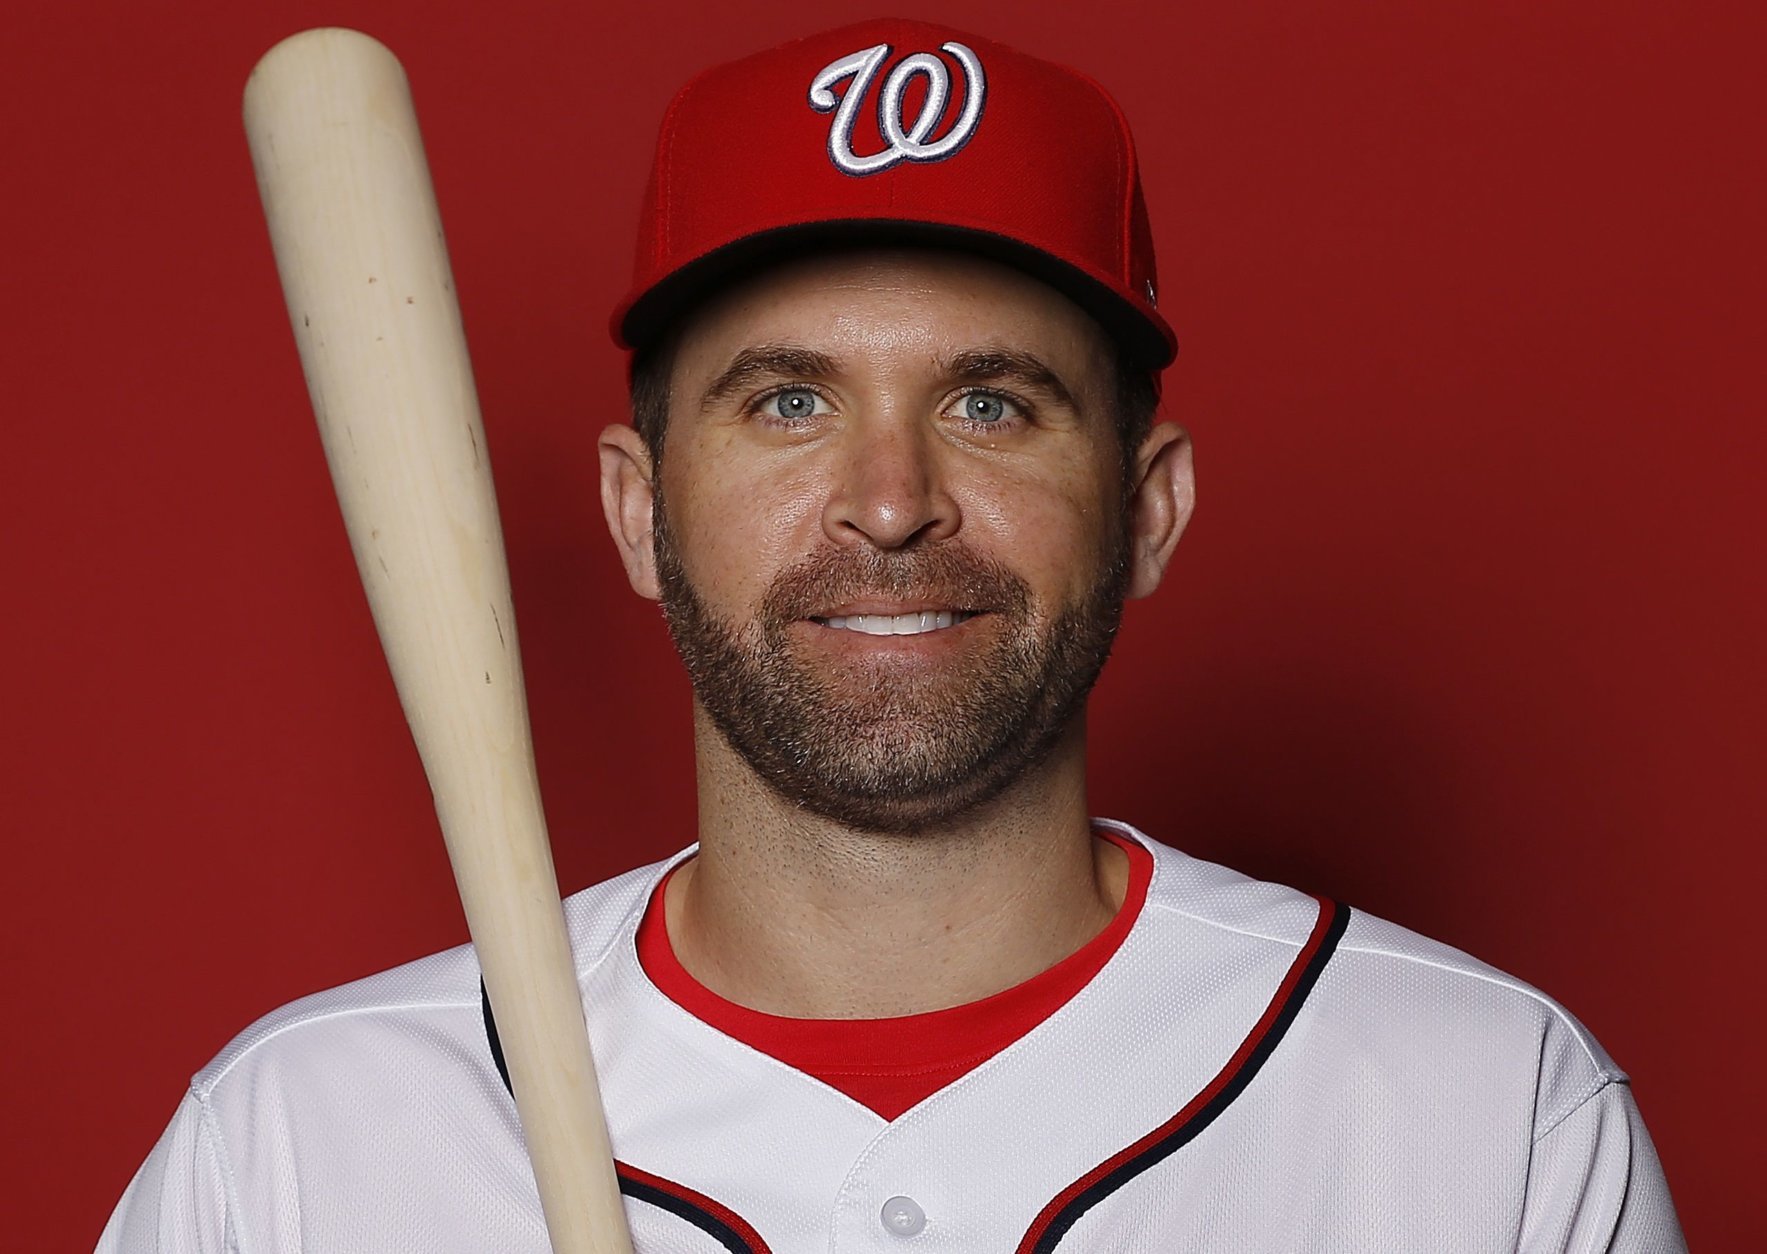 WEST PALM BEACH, FLORIDA - FEBRUARY 22:  Brian Dozier #9 of the Washington Nationals poses for a portrait on Photo Day at FITTEAM Ballpark of The Palm Beaches during on February 22, 2019 in West Palm Beach, Florida. (Photo by Michael Reaves/Getty Images)